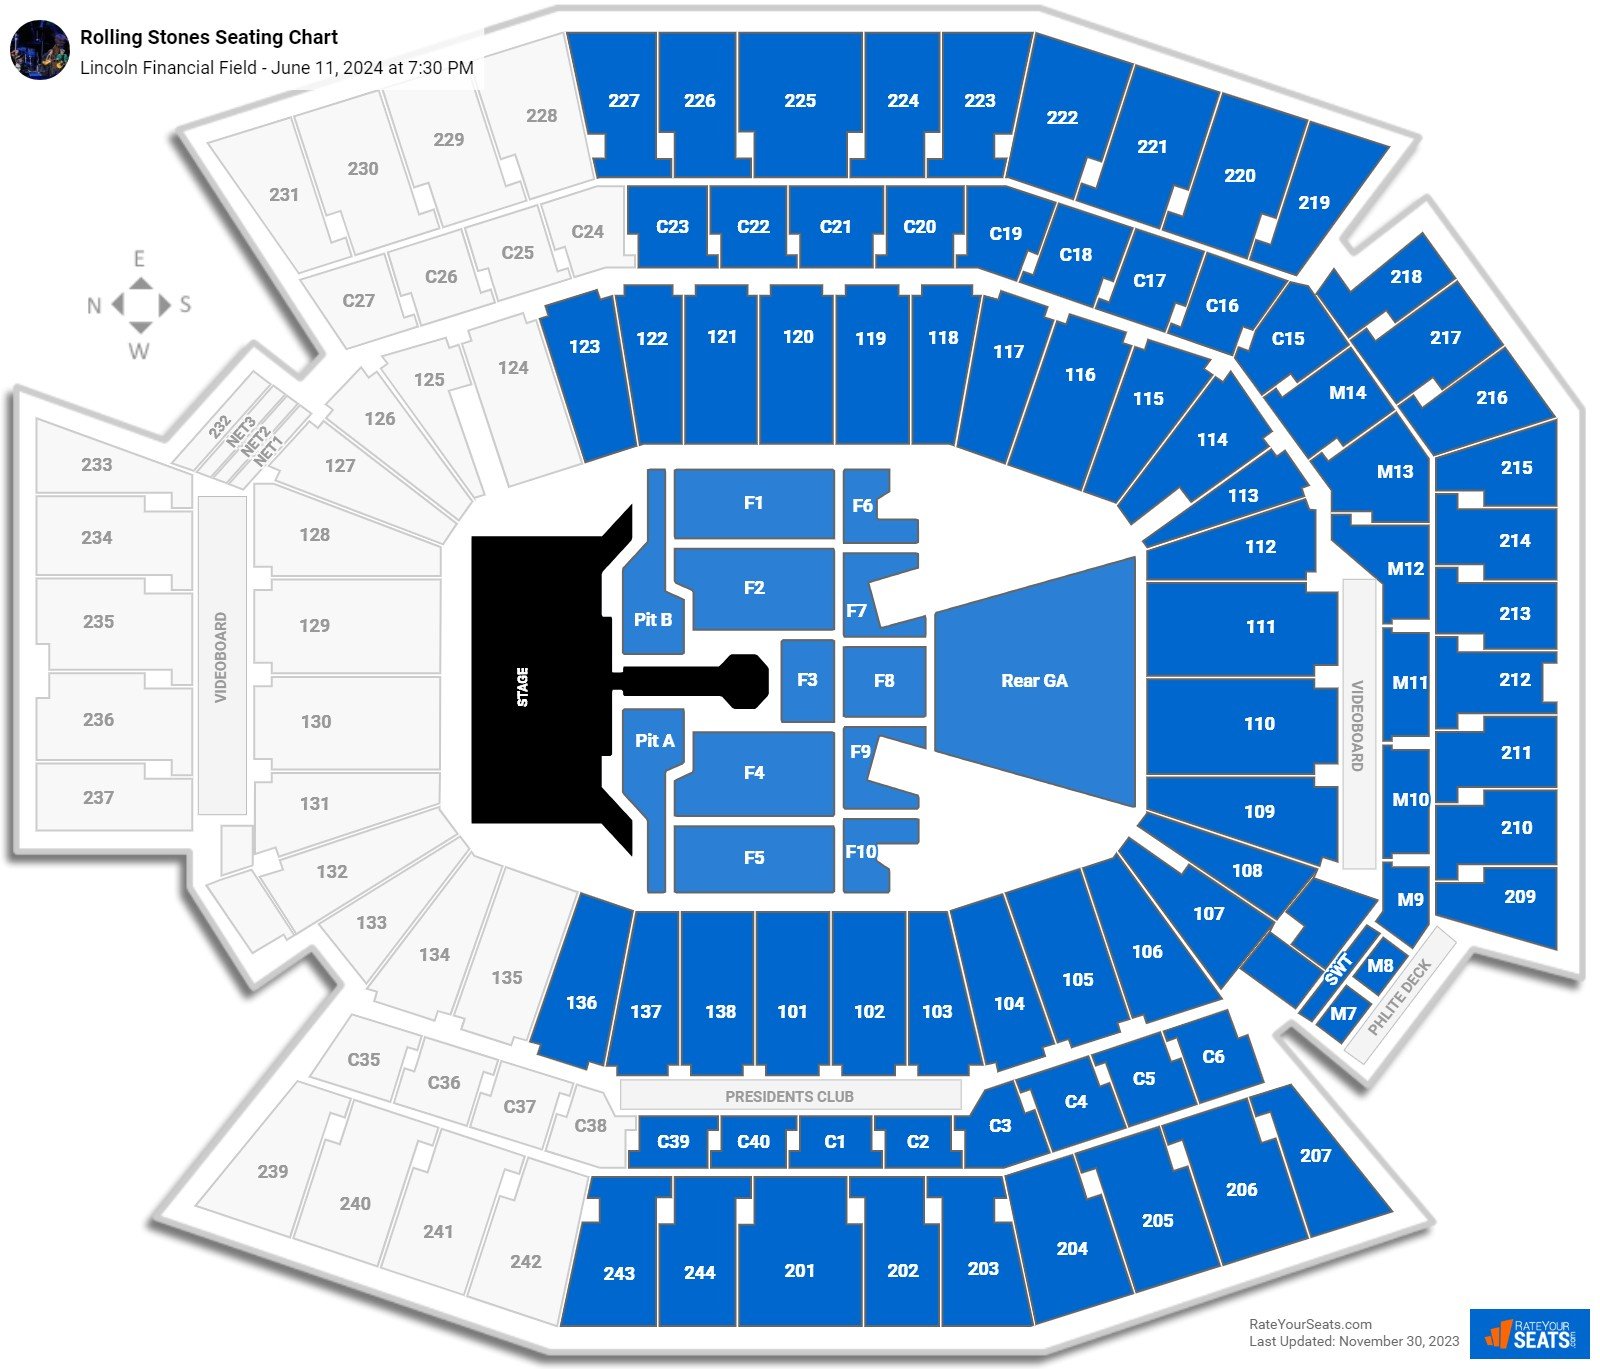 Rolling Stones with Kaleo seating chart Lincoln Financial Field